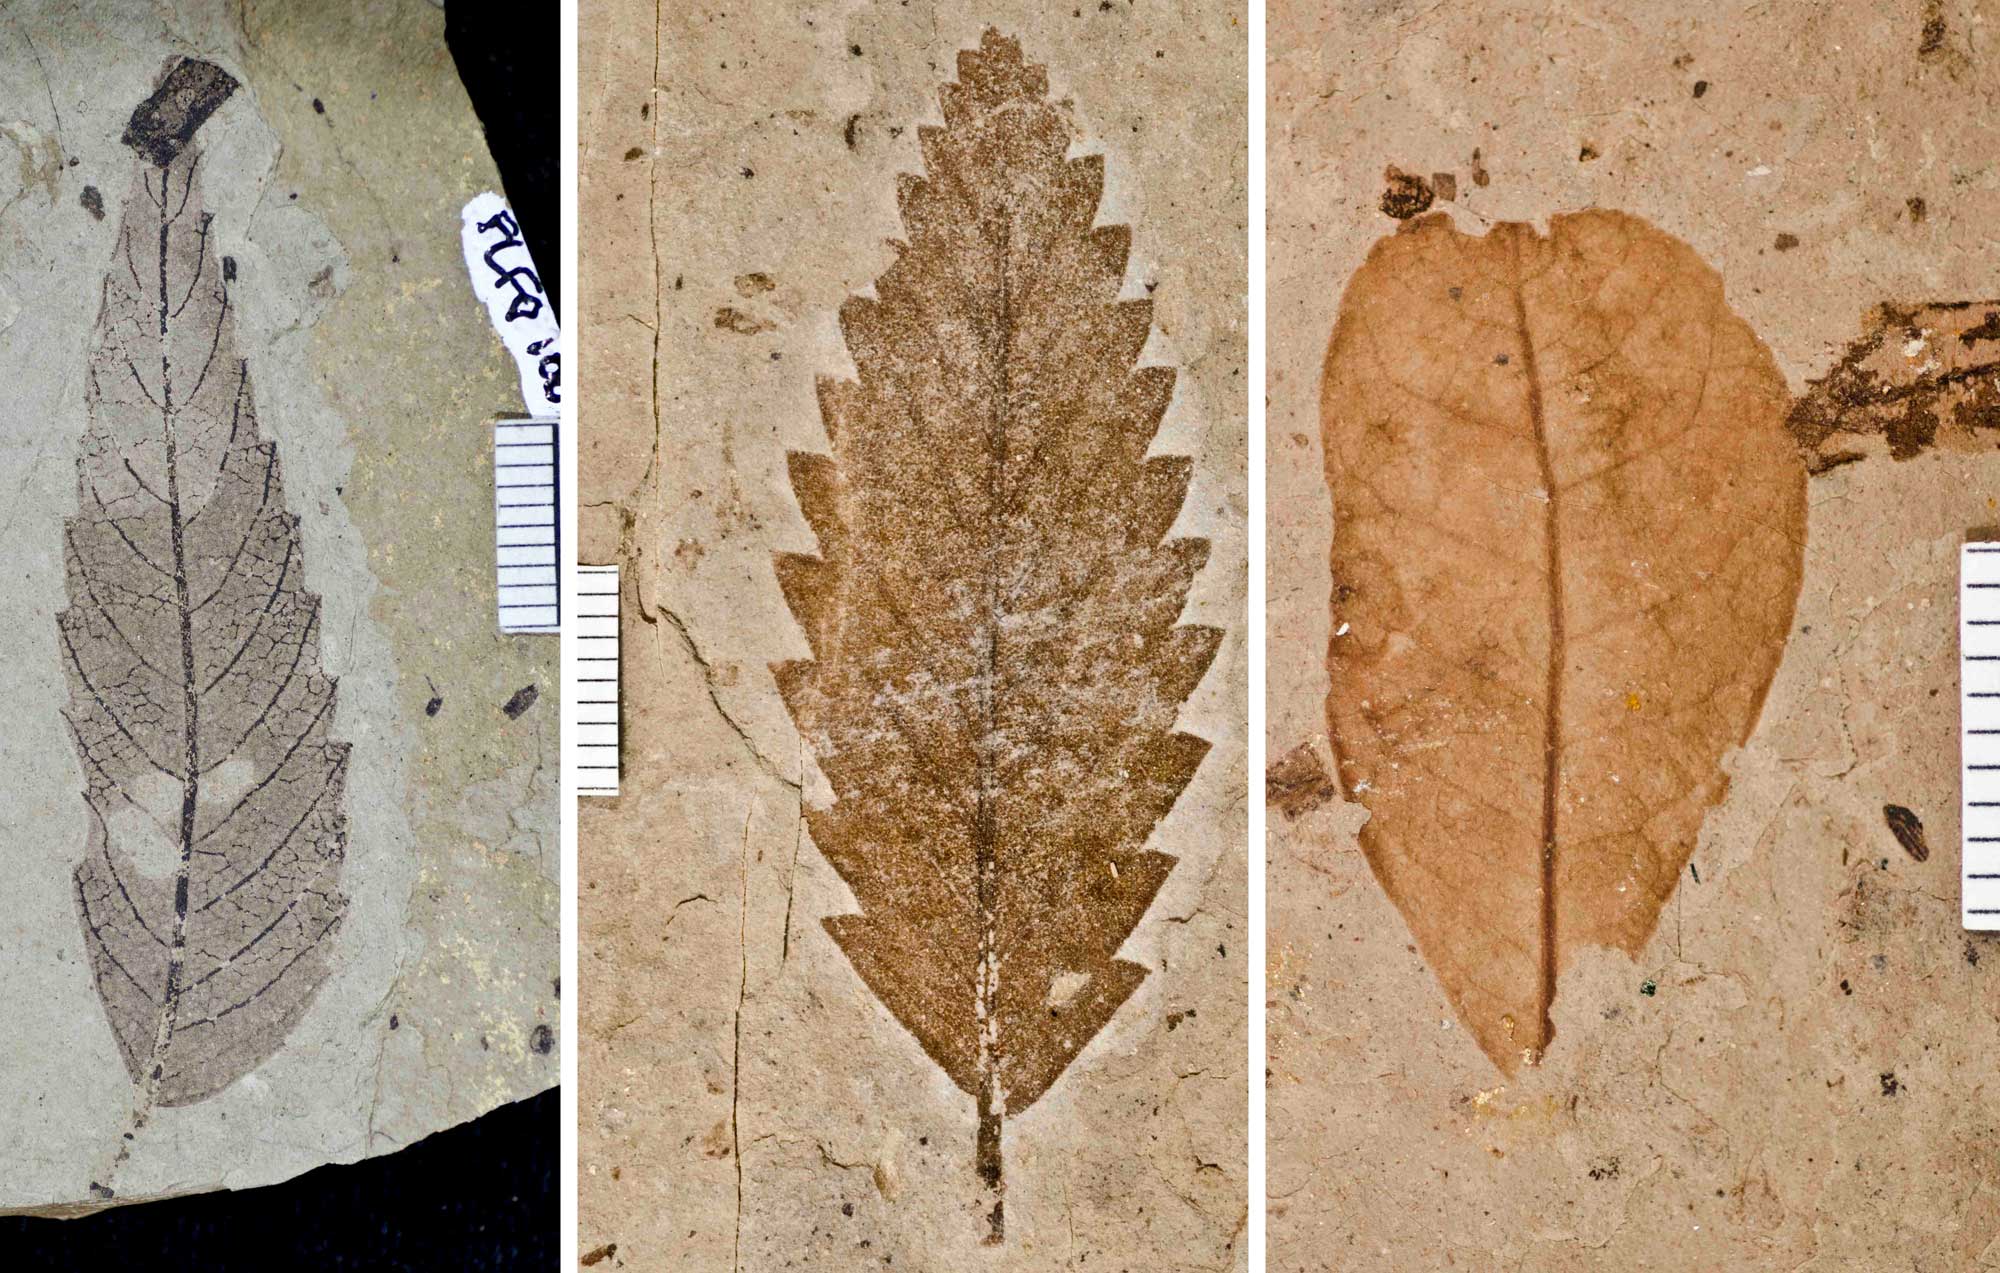 3-Panel figure showing photos of leaves from the Florissant flora of Colorado. Panel 1: Toothed leaf of Cedrelospermum. Panel 2: Toothed leaf of Fagopsis. Panel 3. Leaf of smoketree with an entire margin.